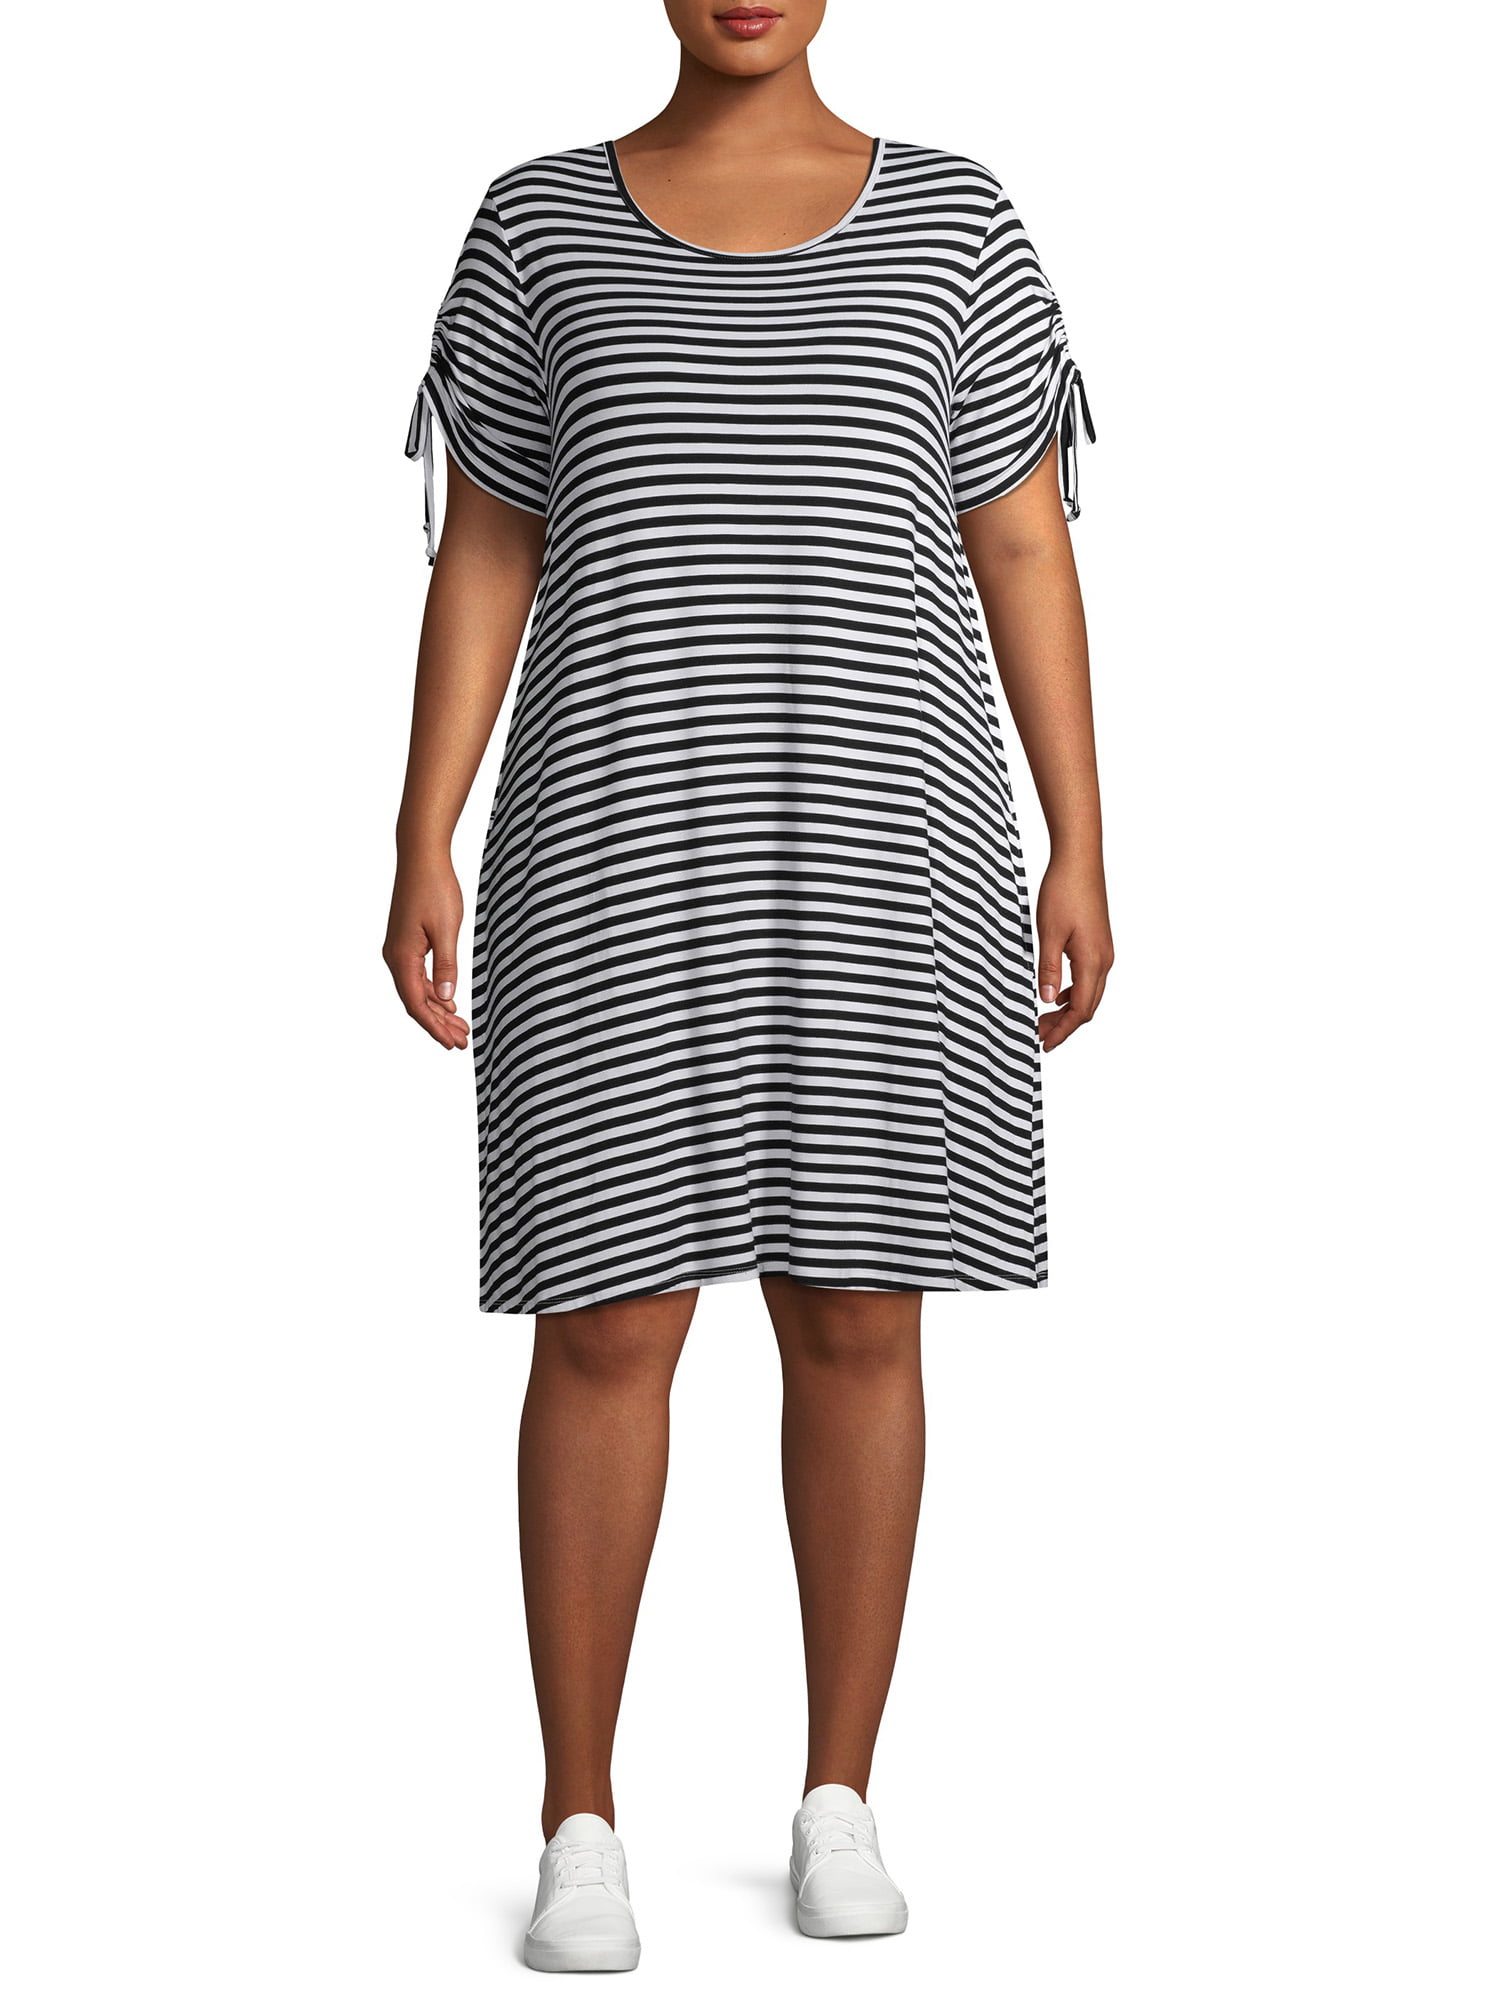 Terra & Sky Women's Plus Size Ruched Short Sleeve Striped T-Shirt